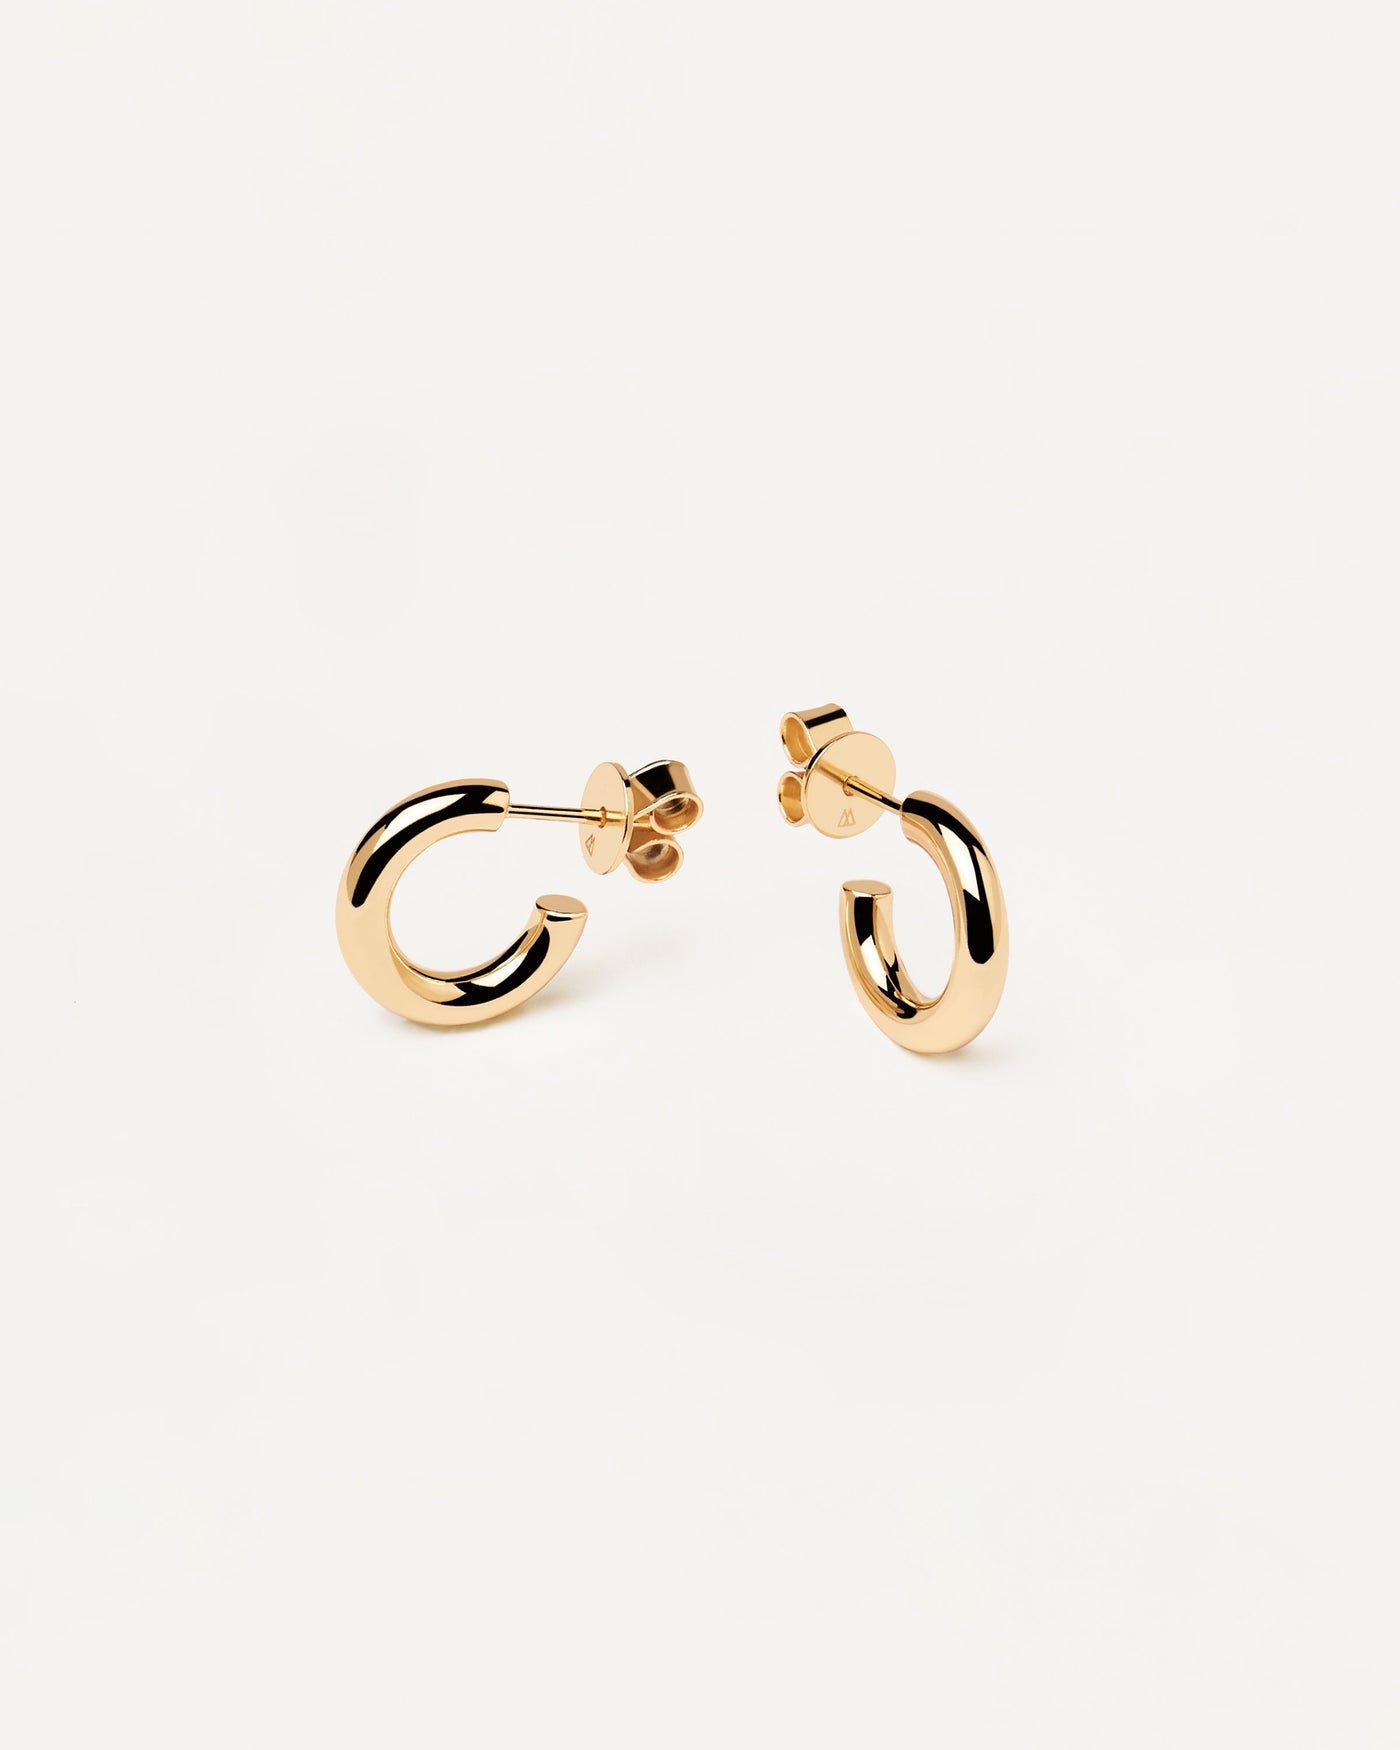 2023 Selection | Mini Cloud Earrings. Huggie c-hoop earrings in 18k gold plated sterling silver  with a butterfly push-back. Get the latest arrival from PDPAOLA. Place your order safely and get this Best Seller. Free Shipping.